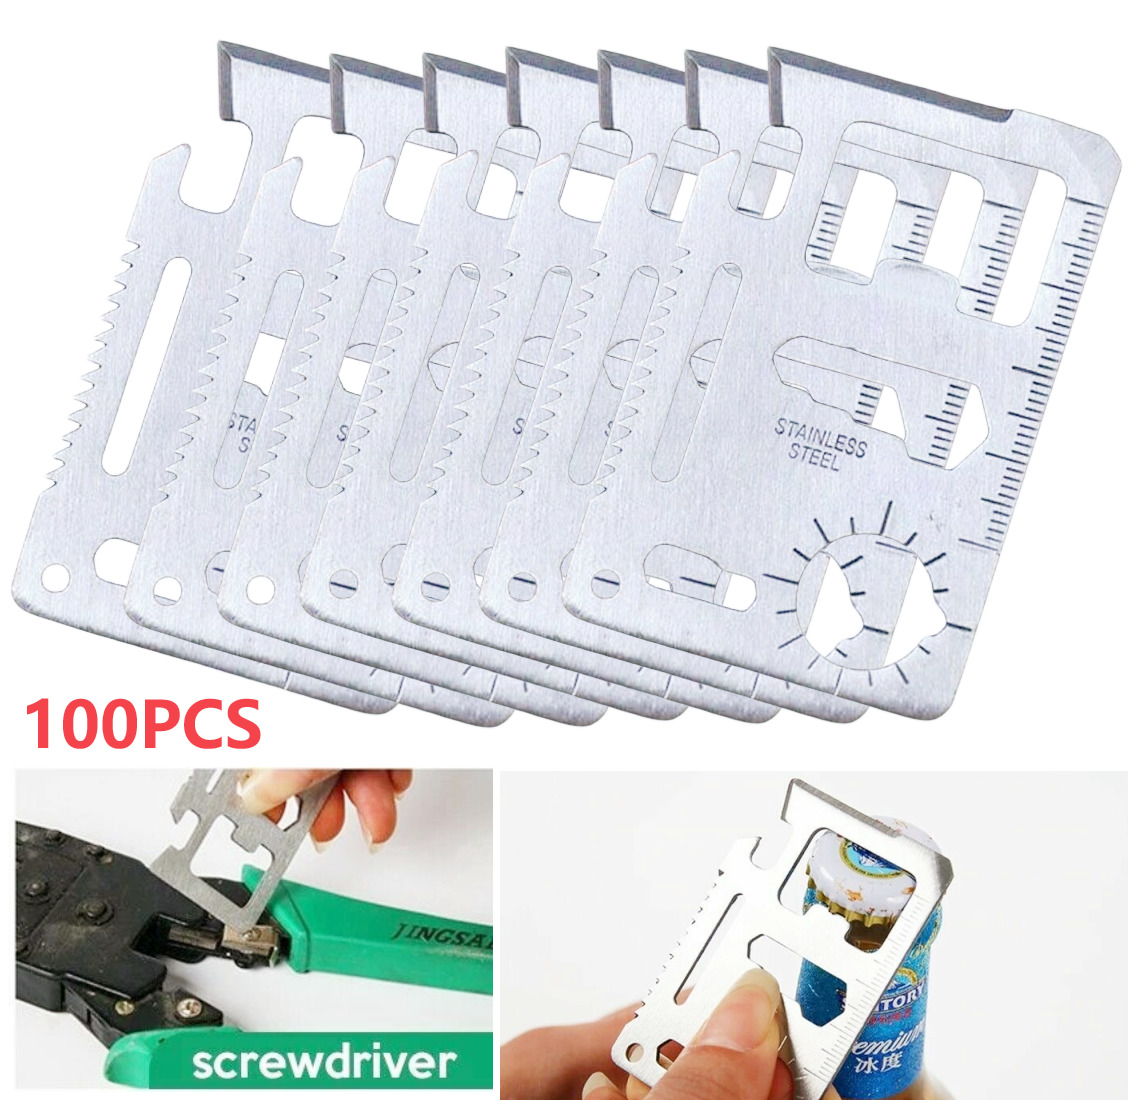 100X 11-in-1 Multi Tool Credit Card Wallet Knife Pocket Survival Camping US Ship